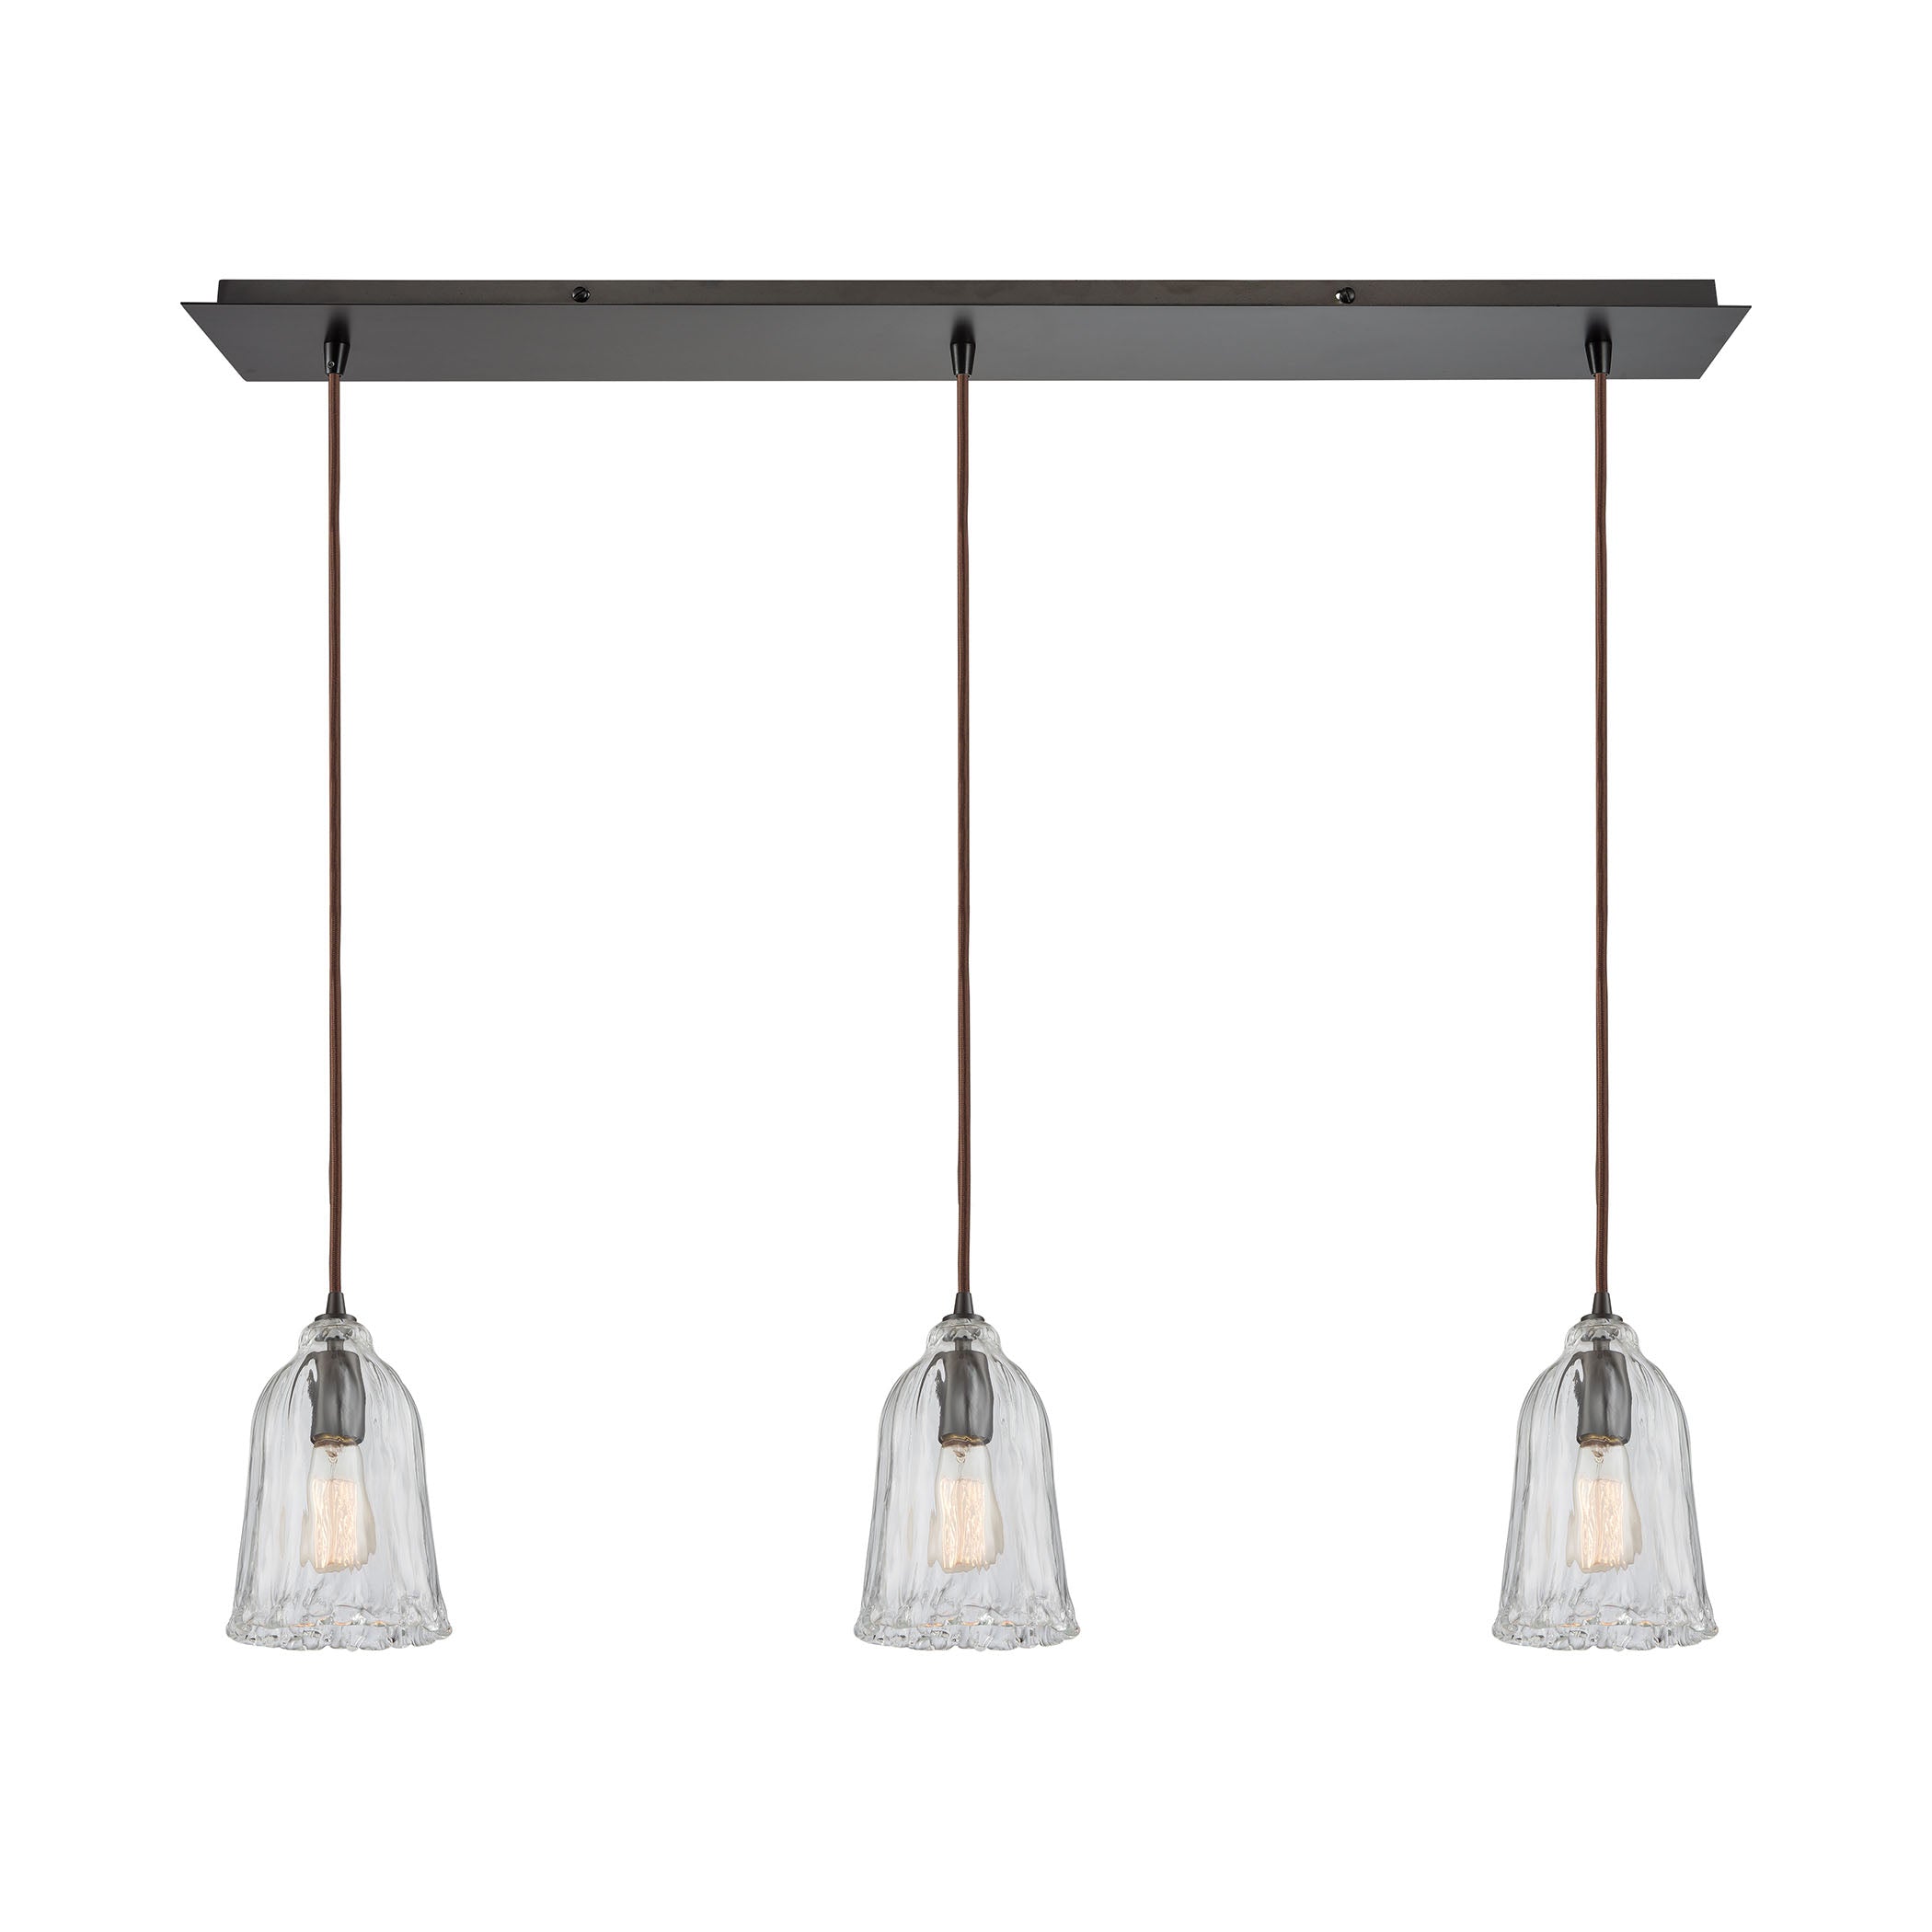 ELK Lighting 10671/3LP Hand Formed Glass 3-Light Linear Mini Pendant Fixture in Oiled Bronze with Clear Hand-formed Glass